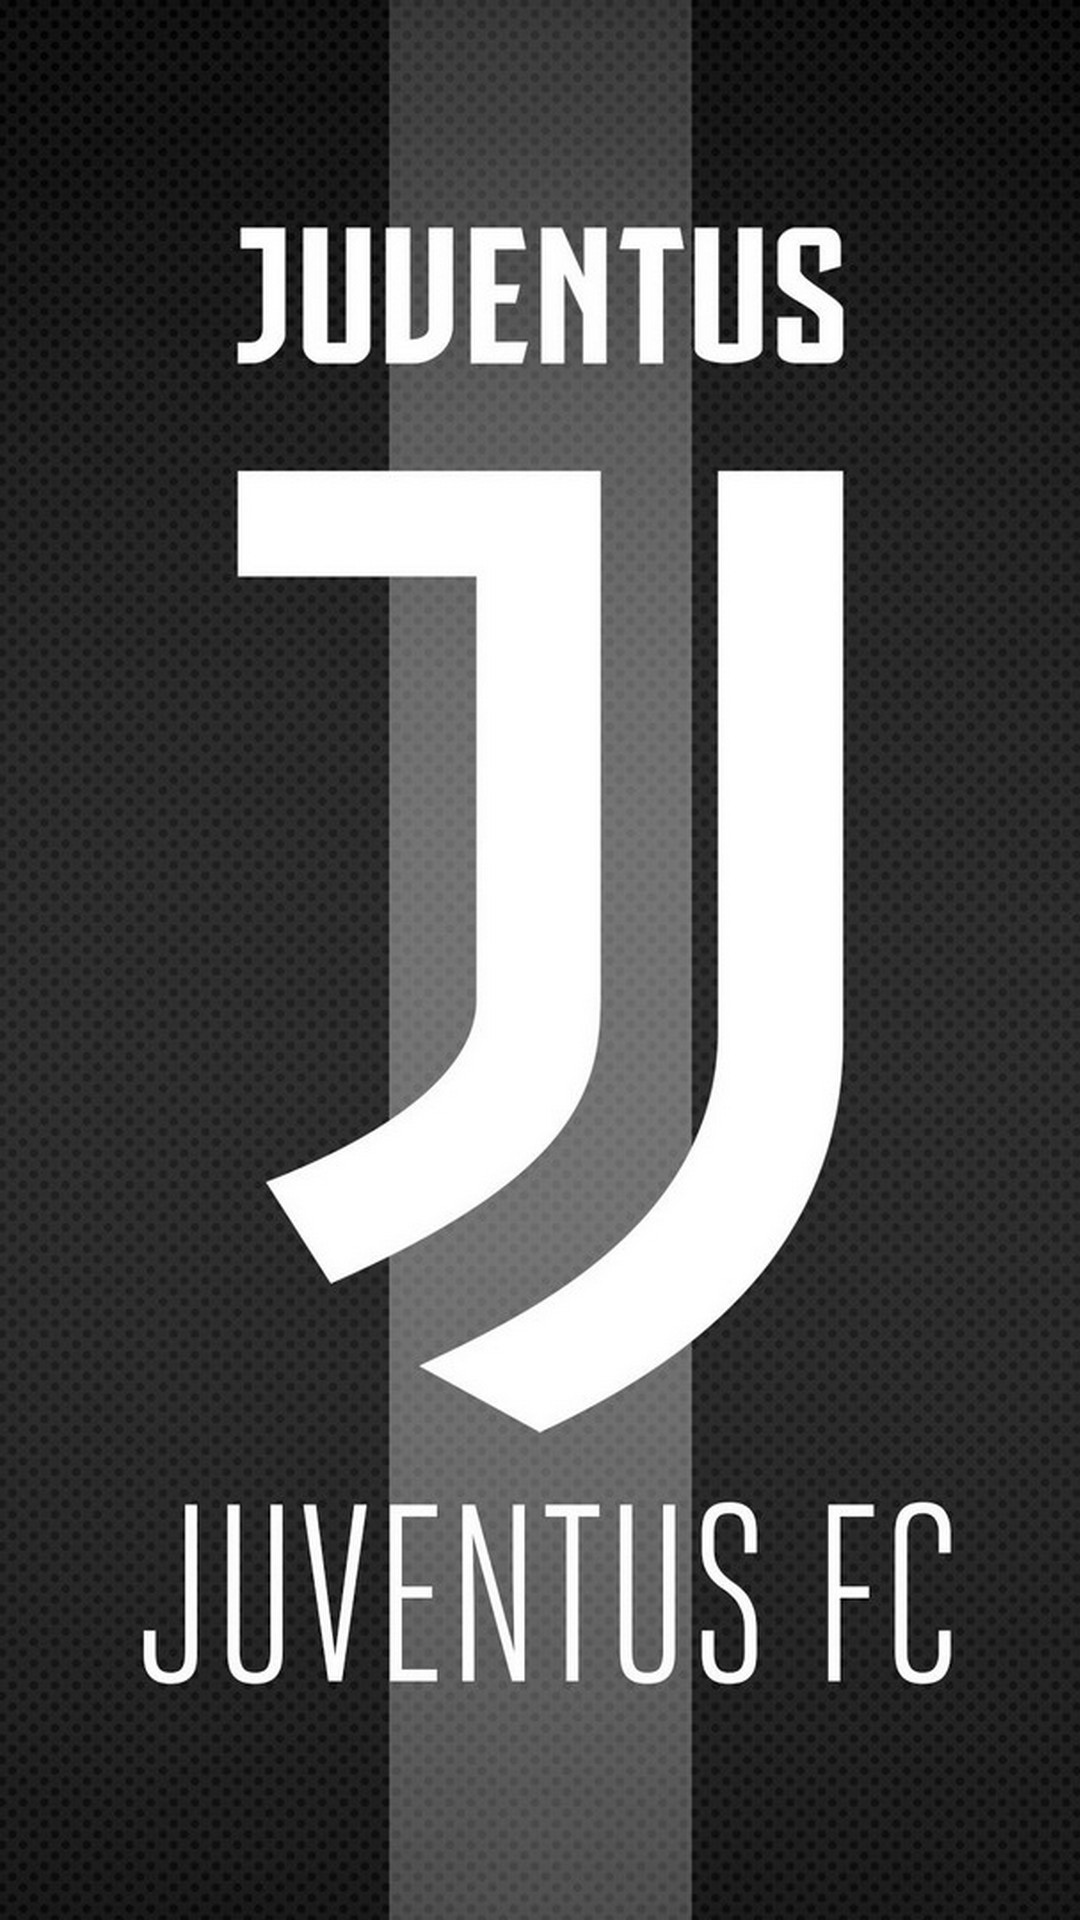 Juventus iPhone 7 Wallpaper With Resolution 1080X1920 pixel. You can make this wallpaper for your Mac or Windows Desktop Background, iPhone, Android or Tablet and another Smartphone device for free